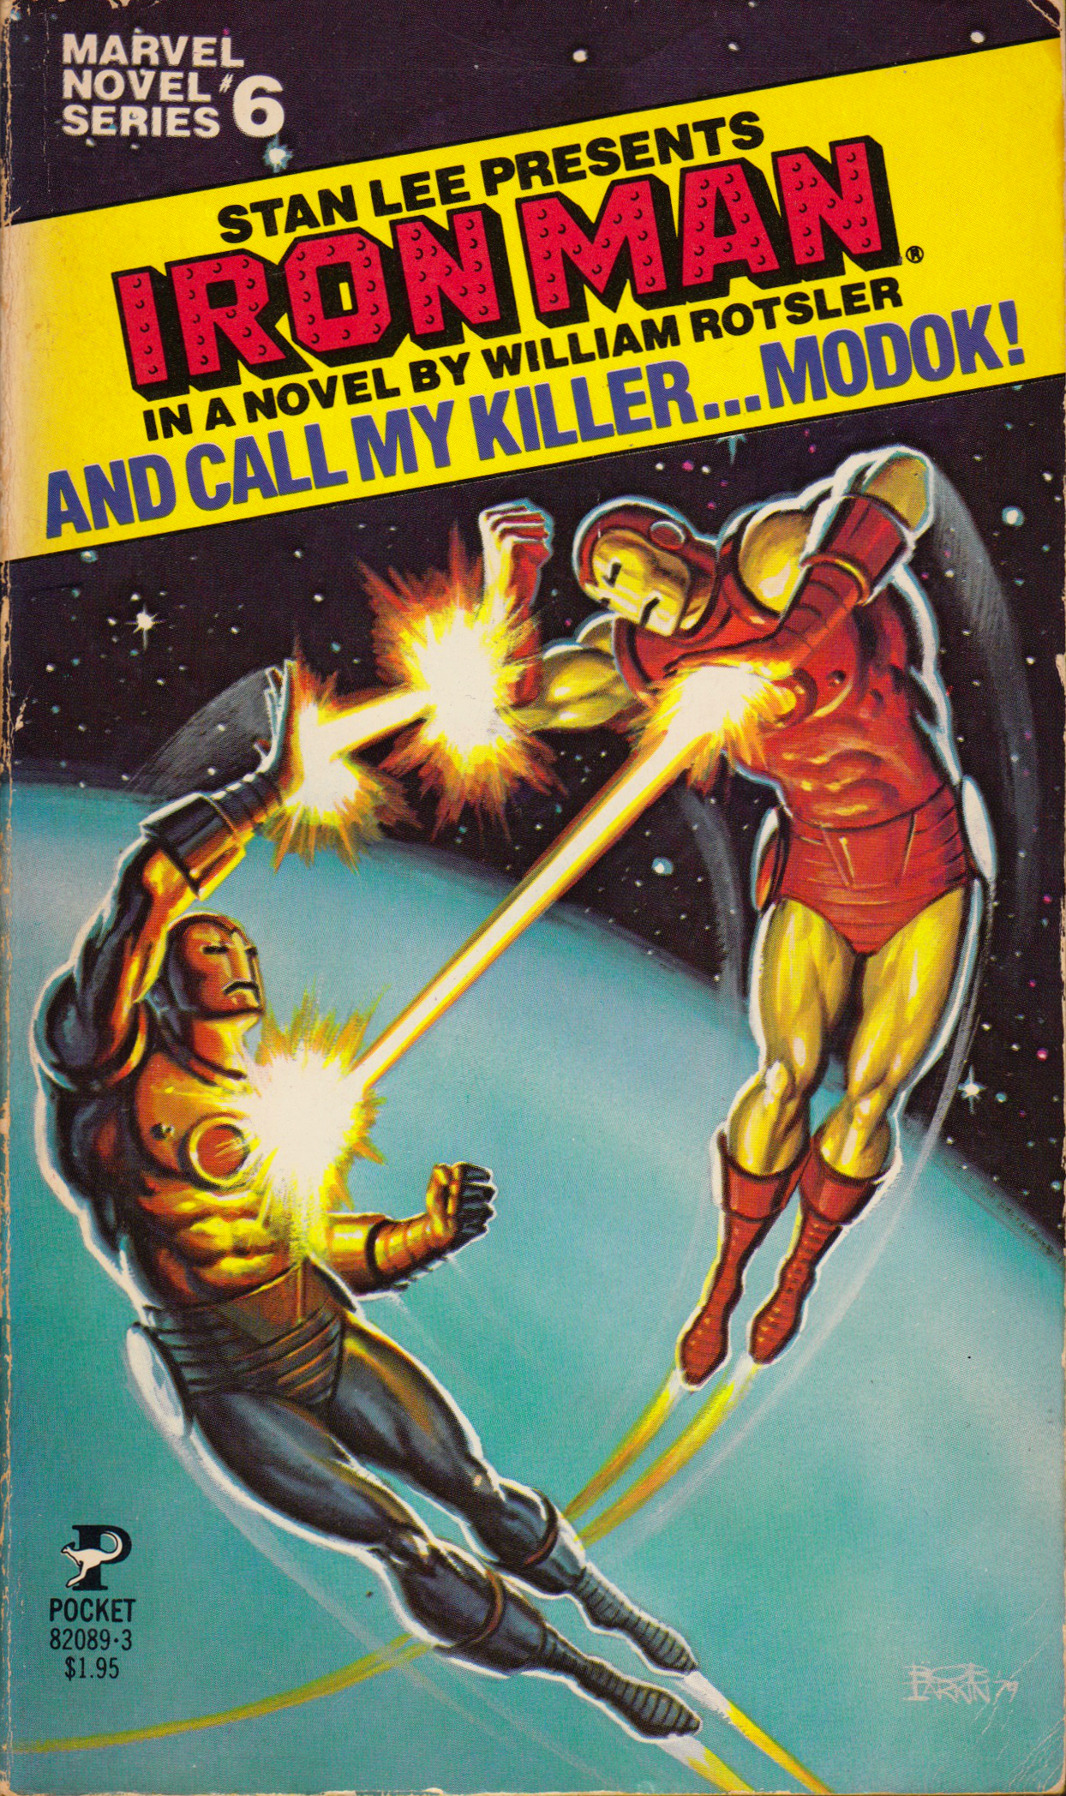 Marvel Novel Series No. 6: Iron Man in And Call My Killer&hellip;Modok!, by William